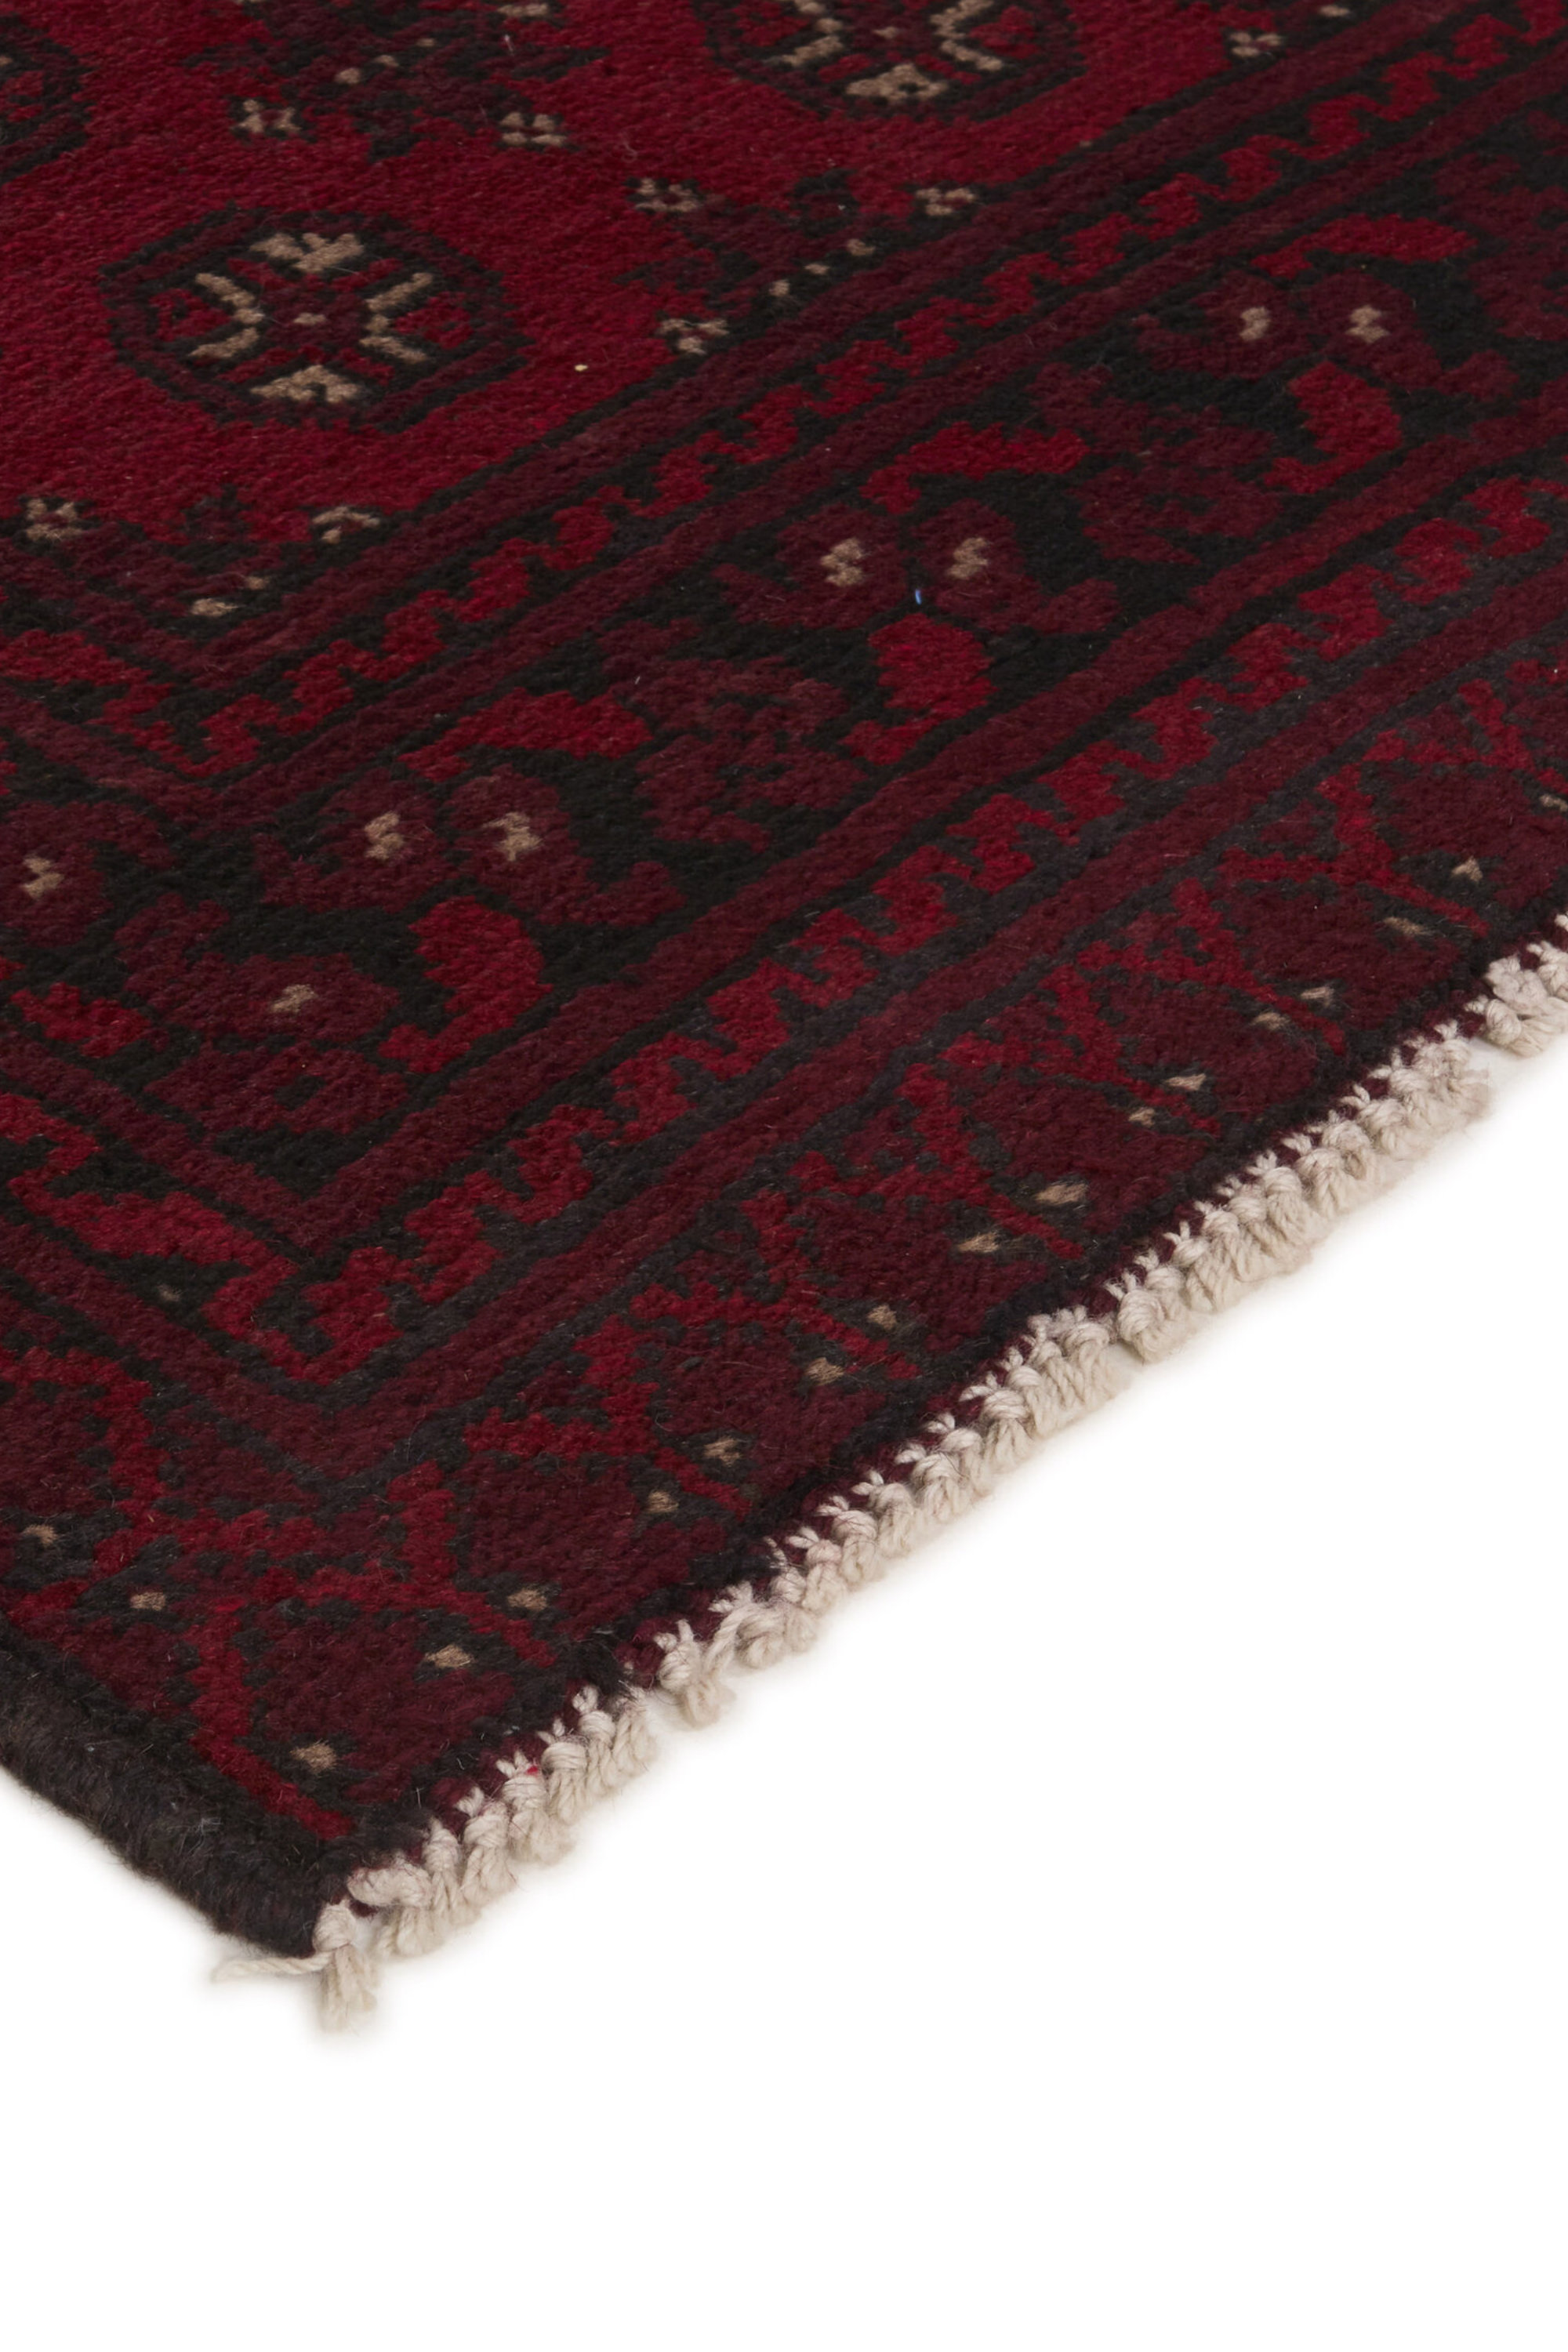 Red oriental wool runner with a traditional elephant's foot pattern